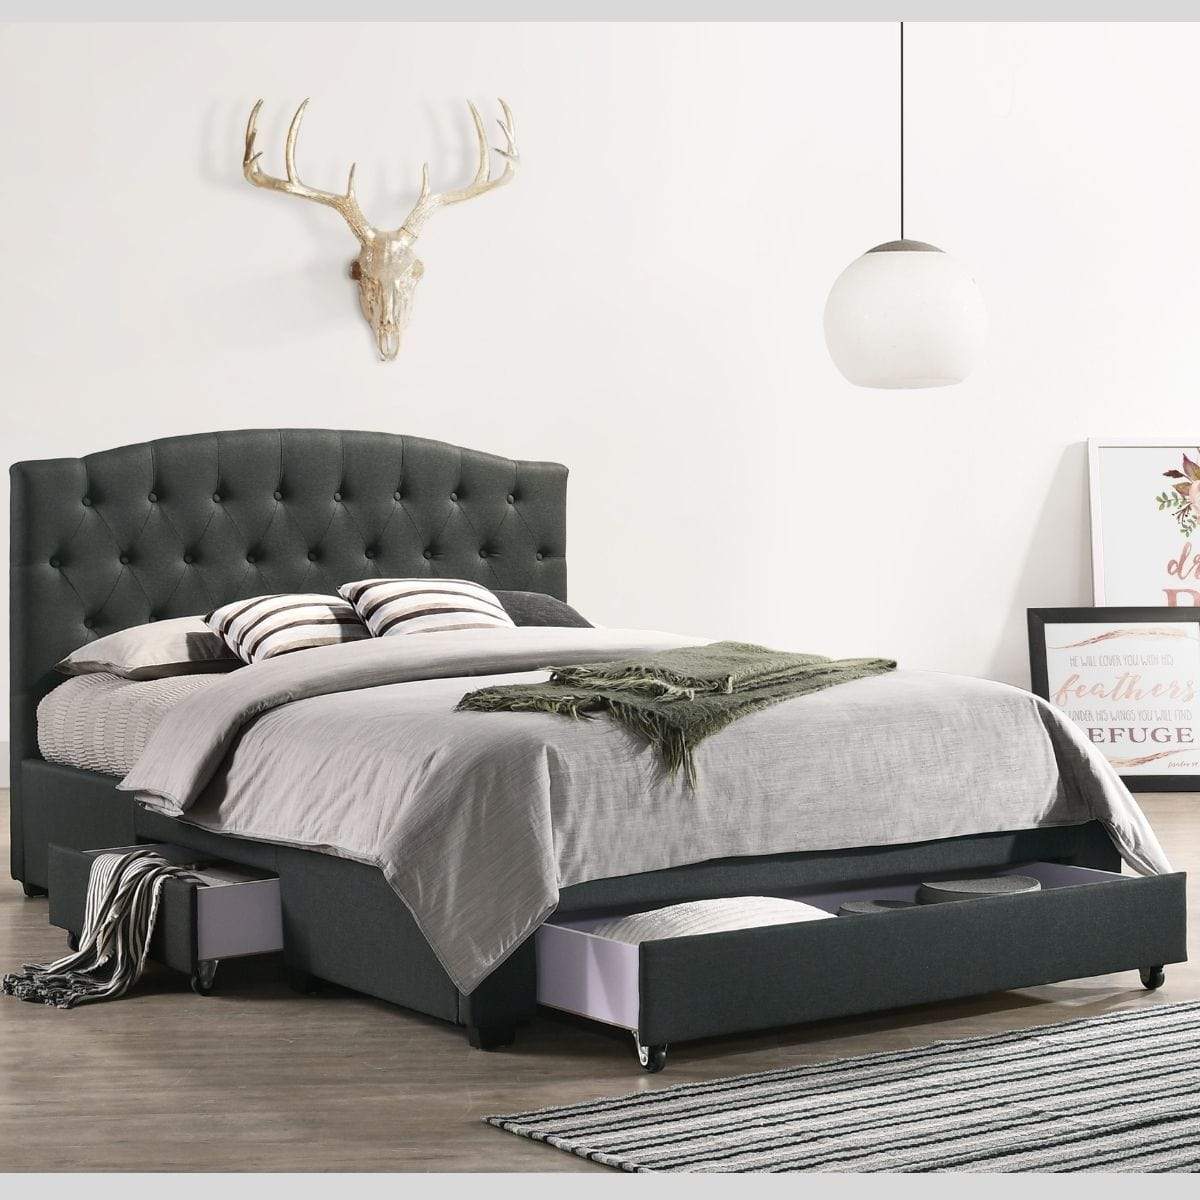 French Provincial Modern Fabric Platform Bed Base Frame with Storage Drawers King Charcoal - Newstart Furniture